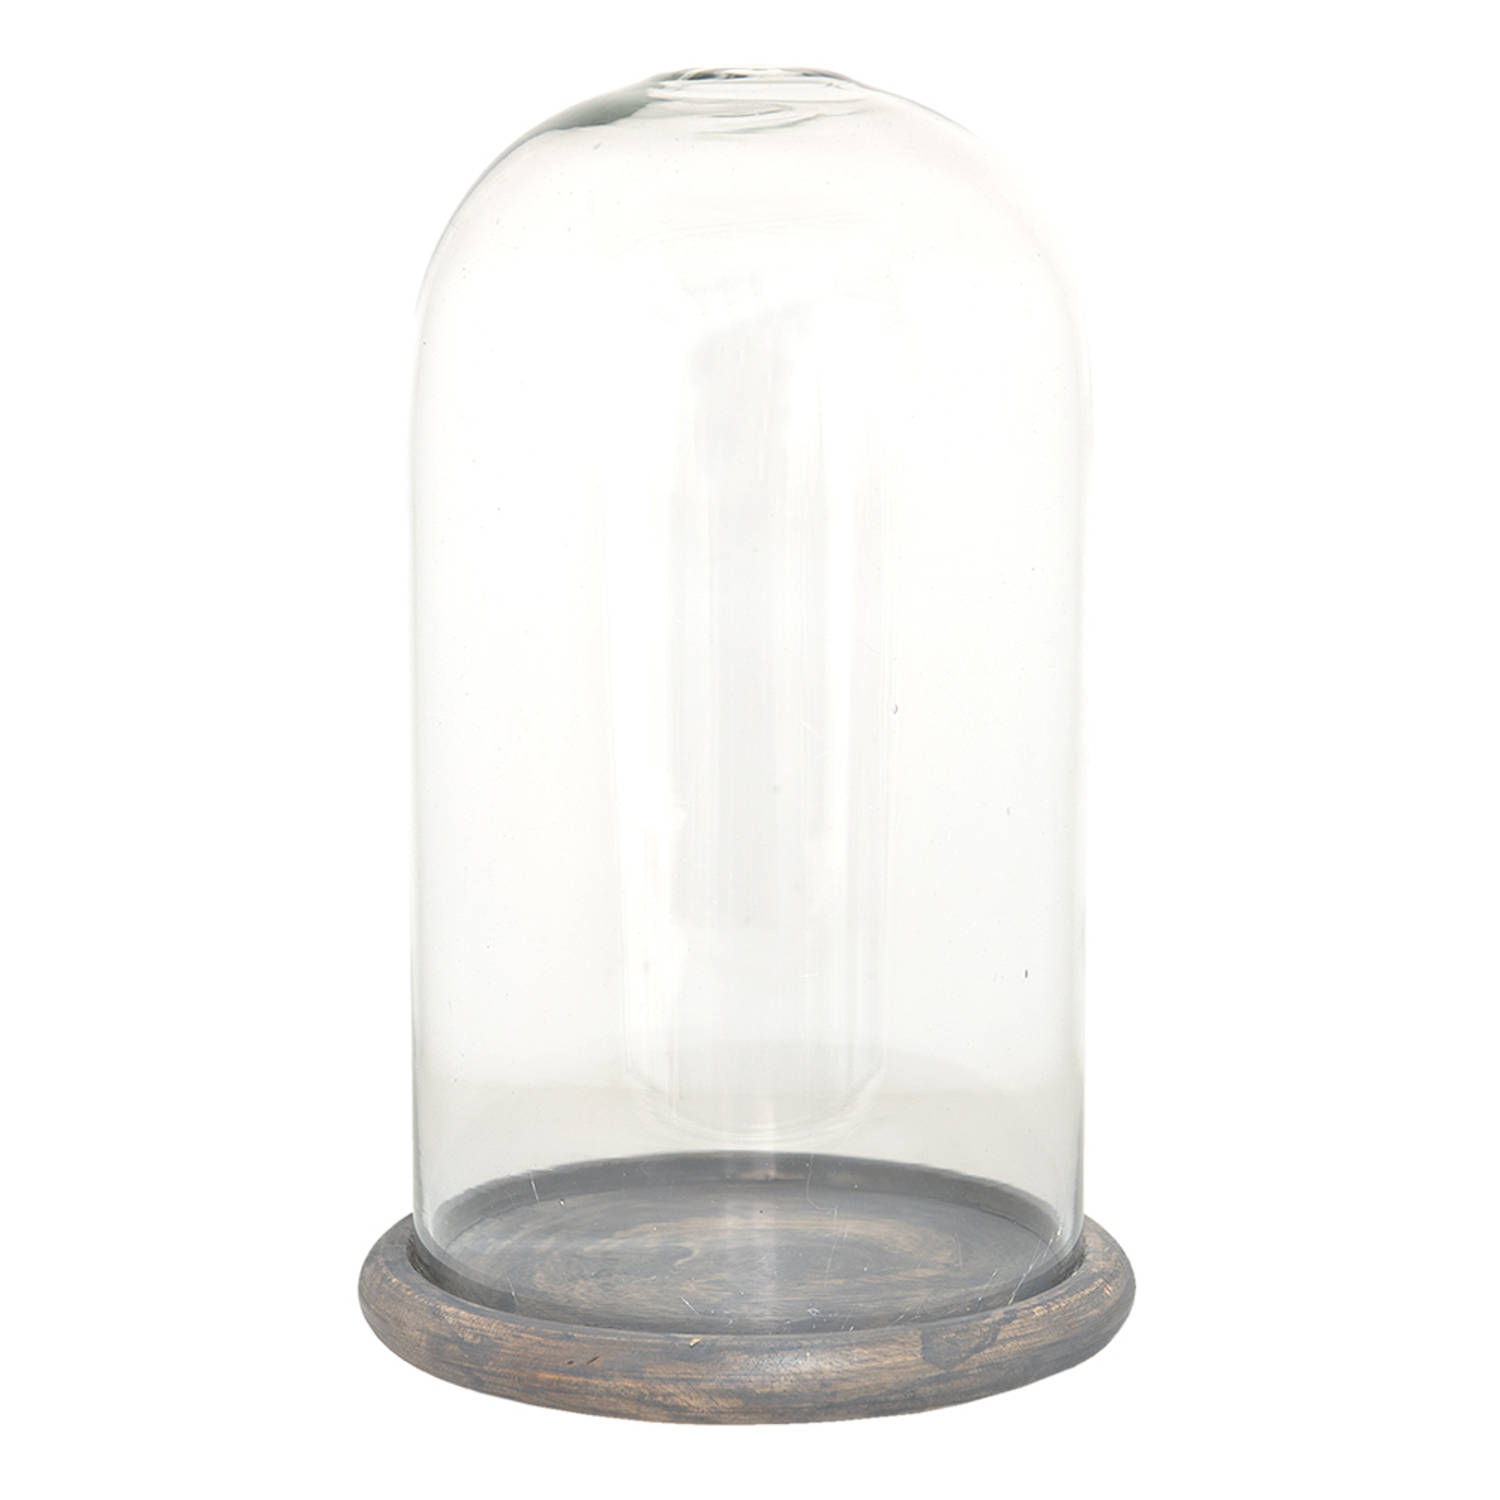 Clayre & Eef Stolp Ø 17*29 Cm Transparant Glas, Hout Glazen Stolp Transparant Glazen Stolp